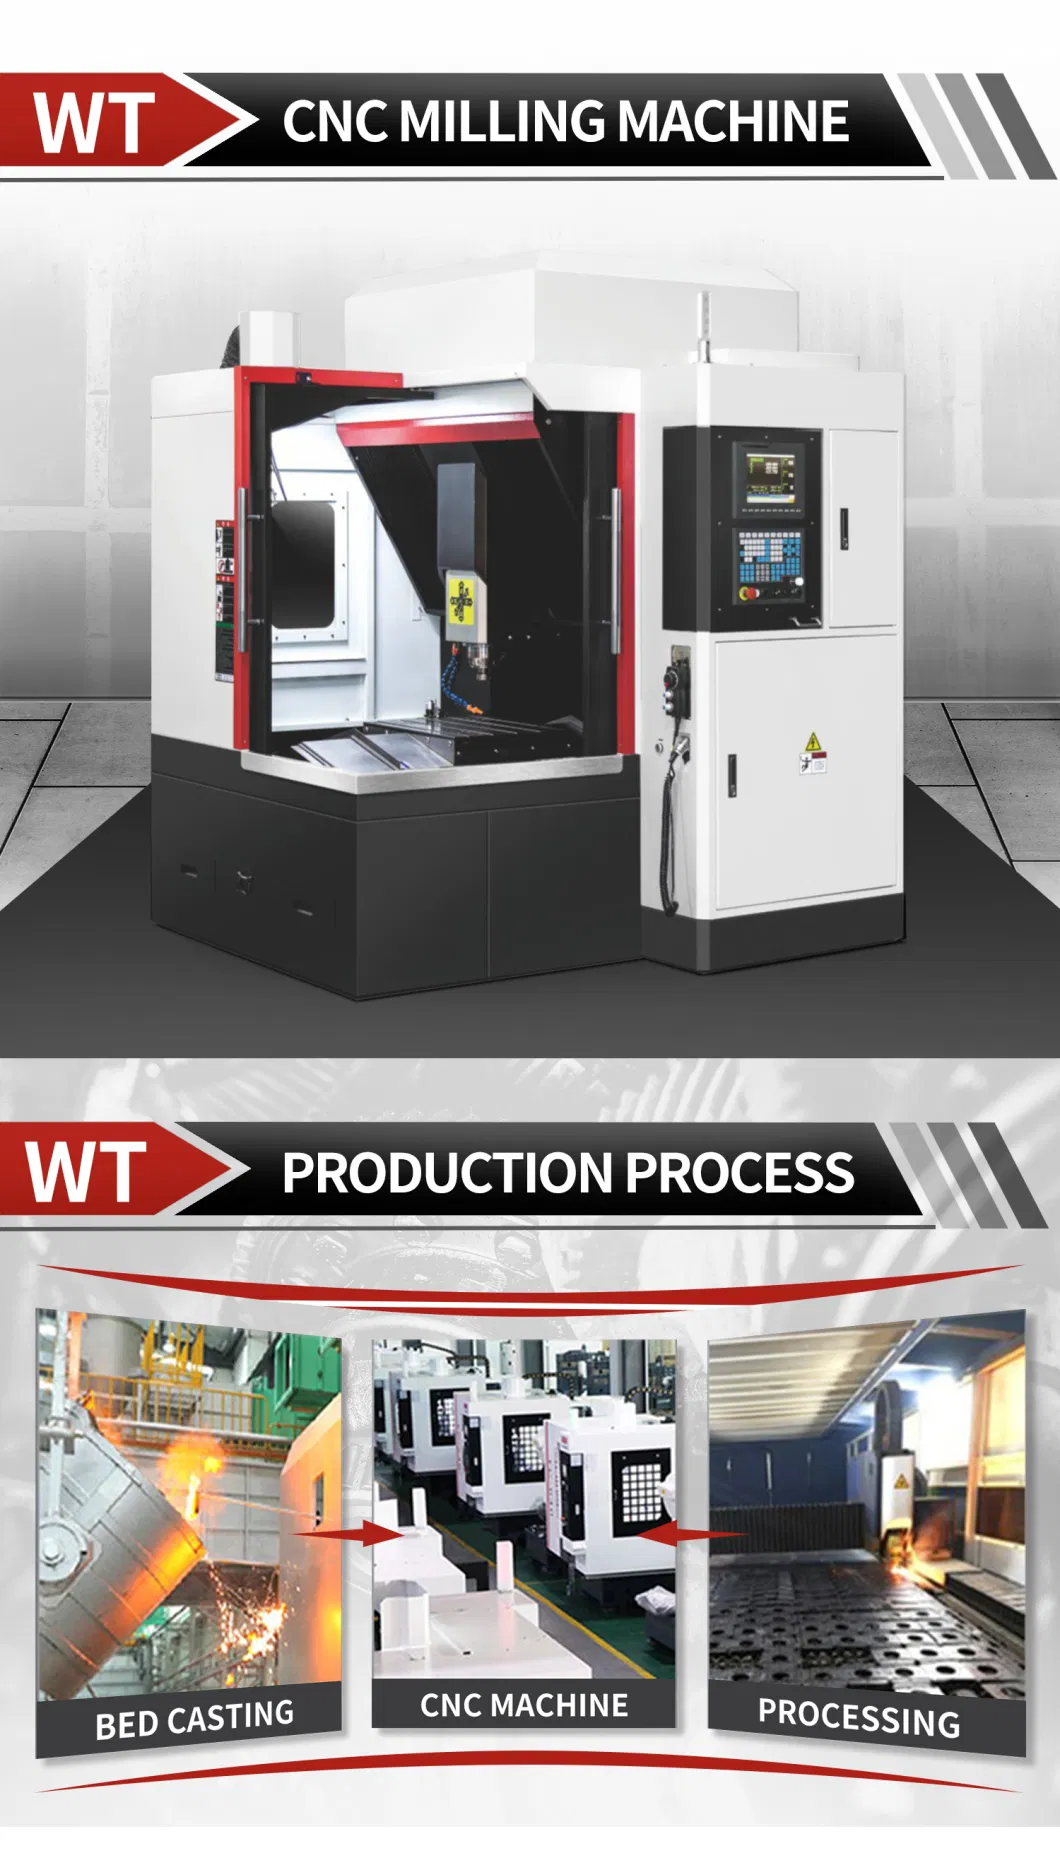 4 Axis Disk Tool Changer CNC Milling Machine with 24000 Rpm Shaft for Aluminum Process